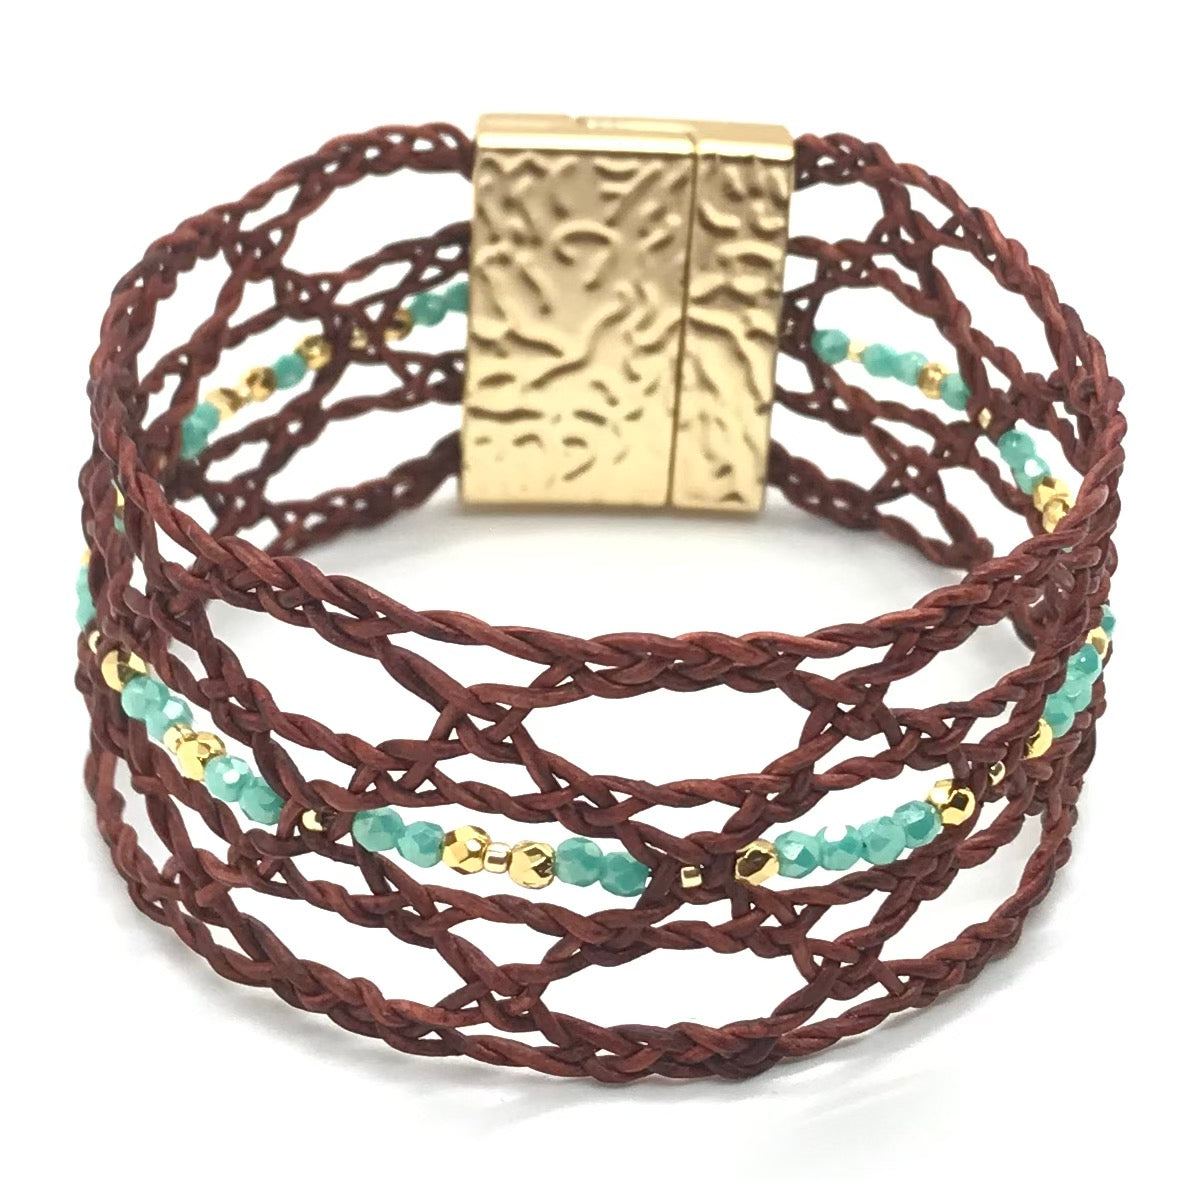 Boho Chic Glass Bead & Knotted Leather Bracelet Kit (Turquoise & Coppe –